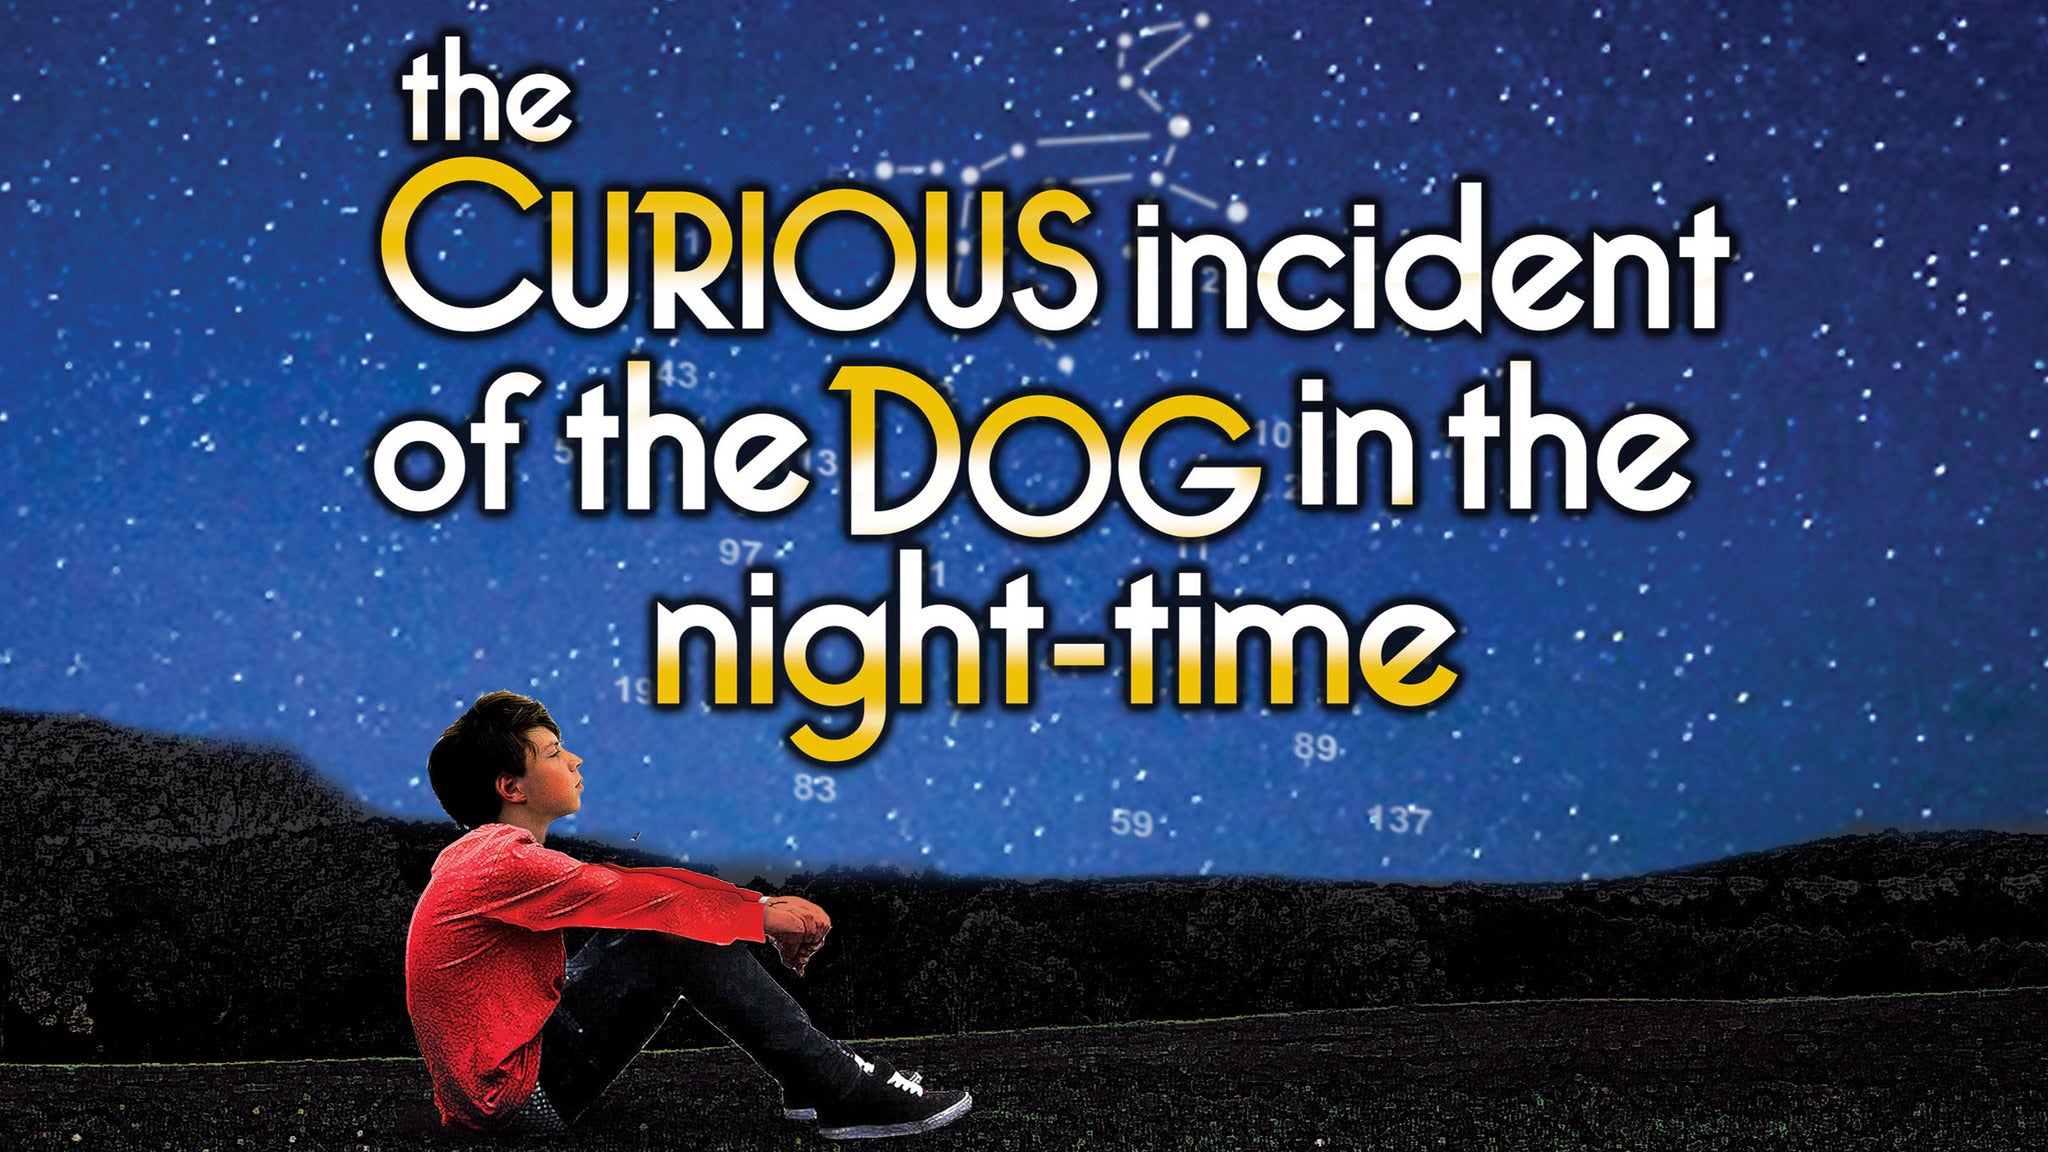 Image result for the curious incident of the dog in the nighttime walnut street theater